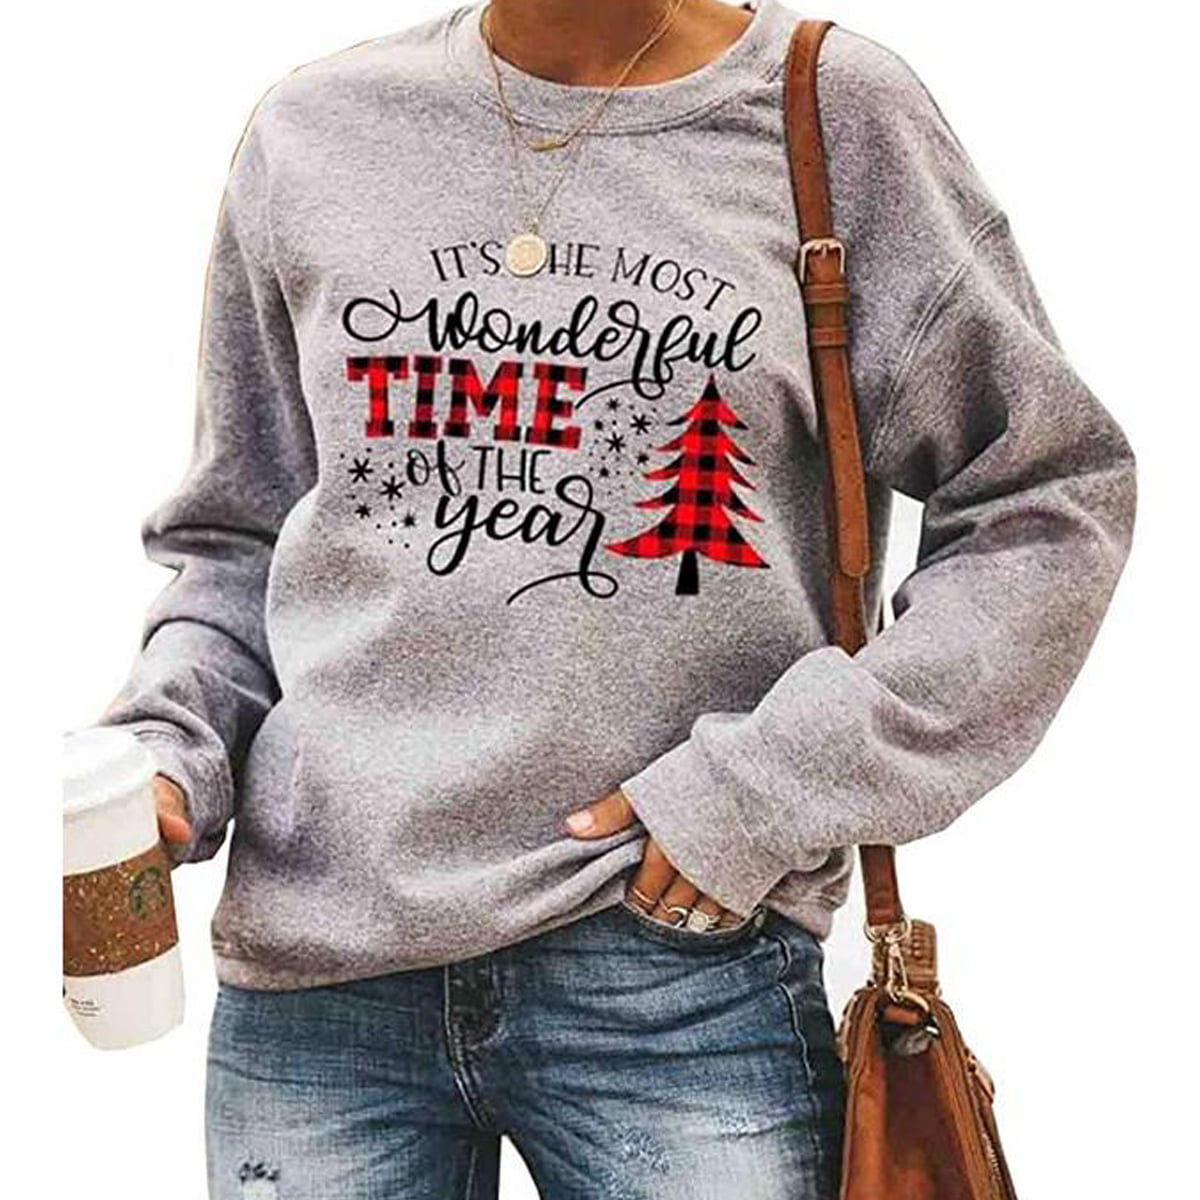 Its The Most Wonderful Time of The Year T Shirt Women Plaid Christmas Tree Tunics Sweatshirt with Pocket Plus Size